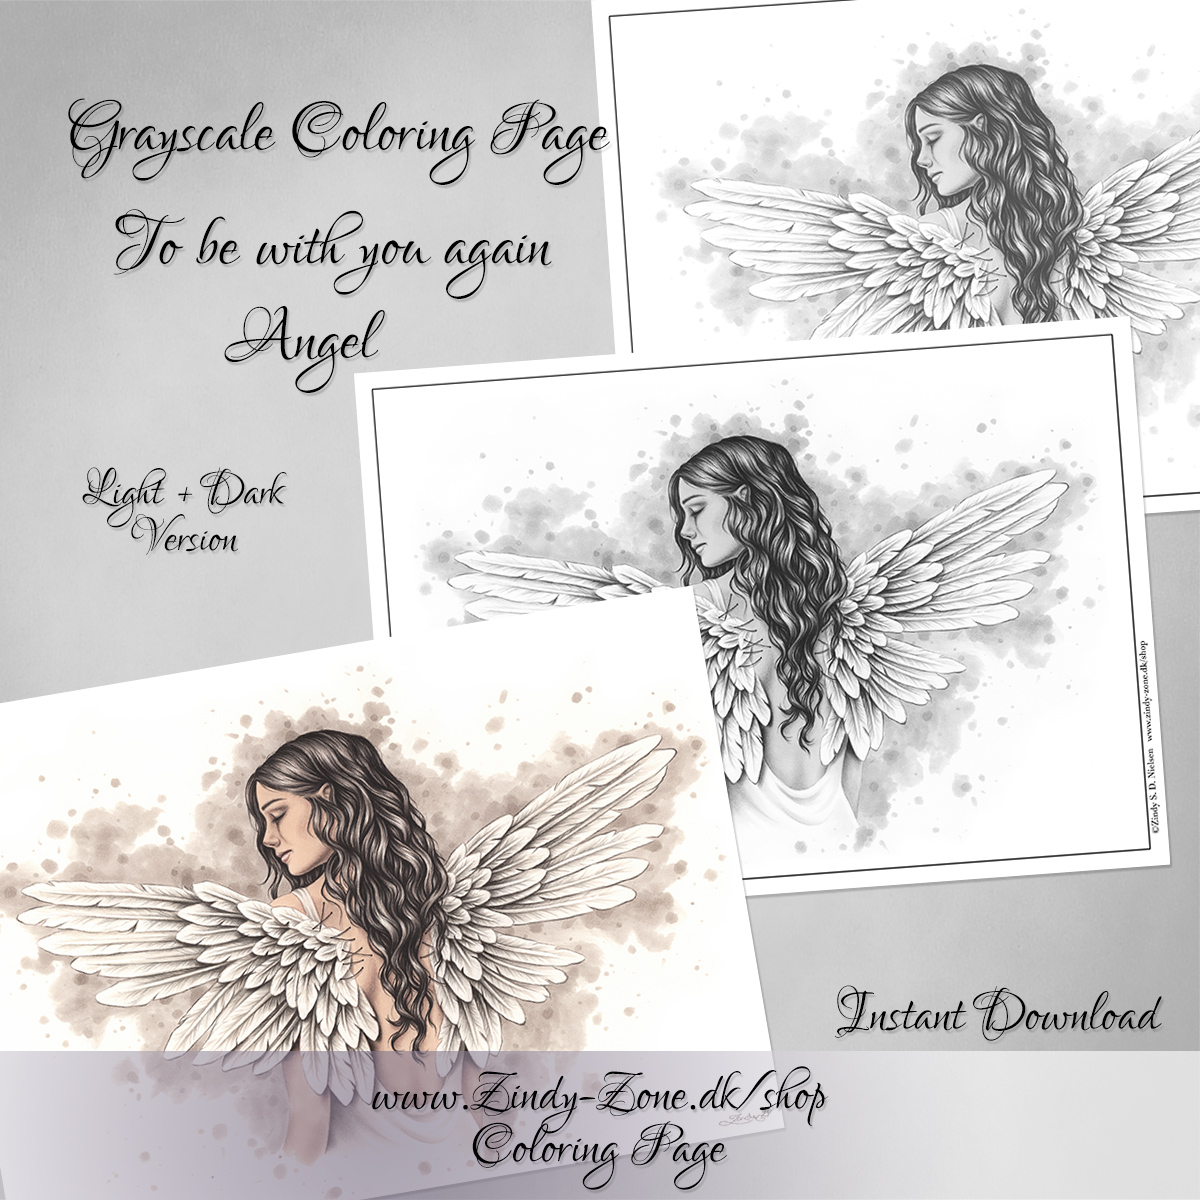 To be with you again Angel Coloring Page - Grayscale